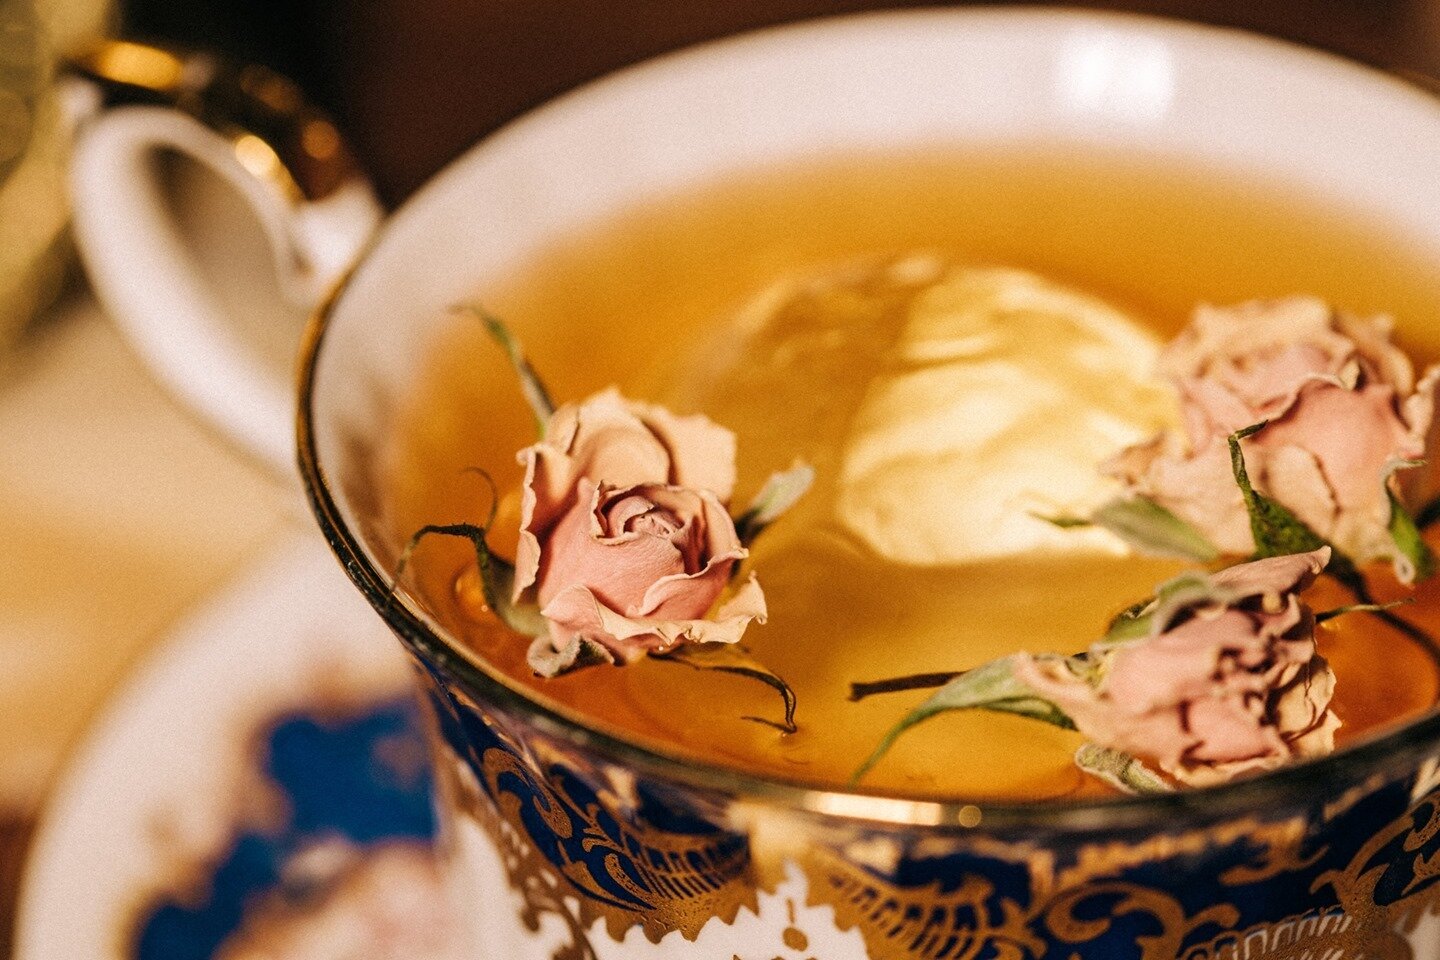 Spring is here! This clarified milk punch pairs so well with our fragrant dried roses.